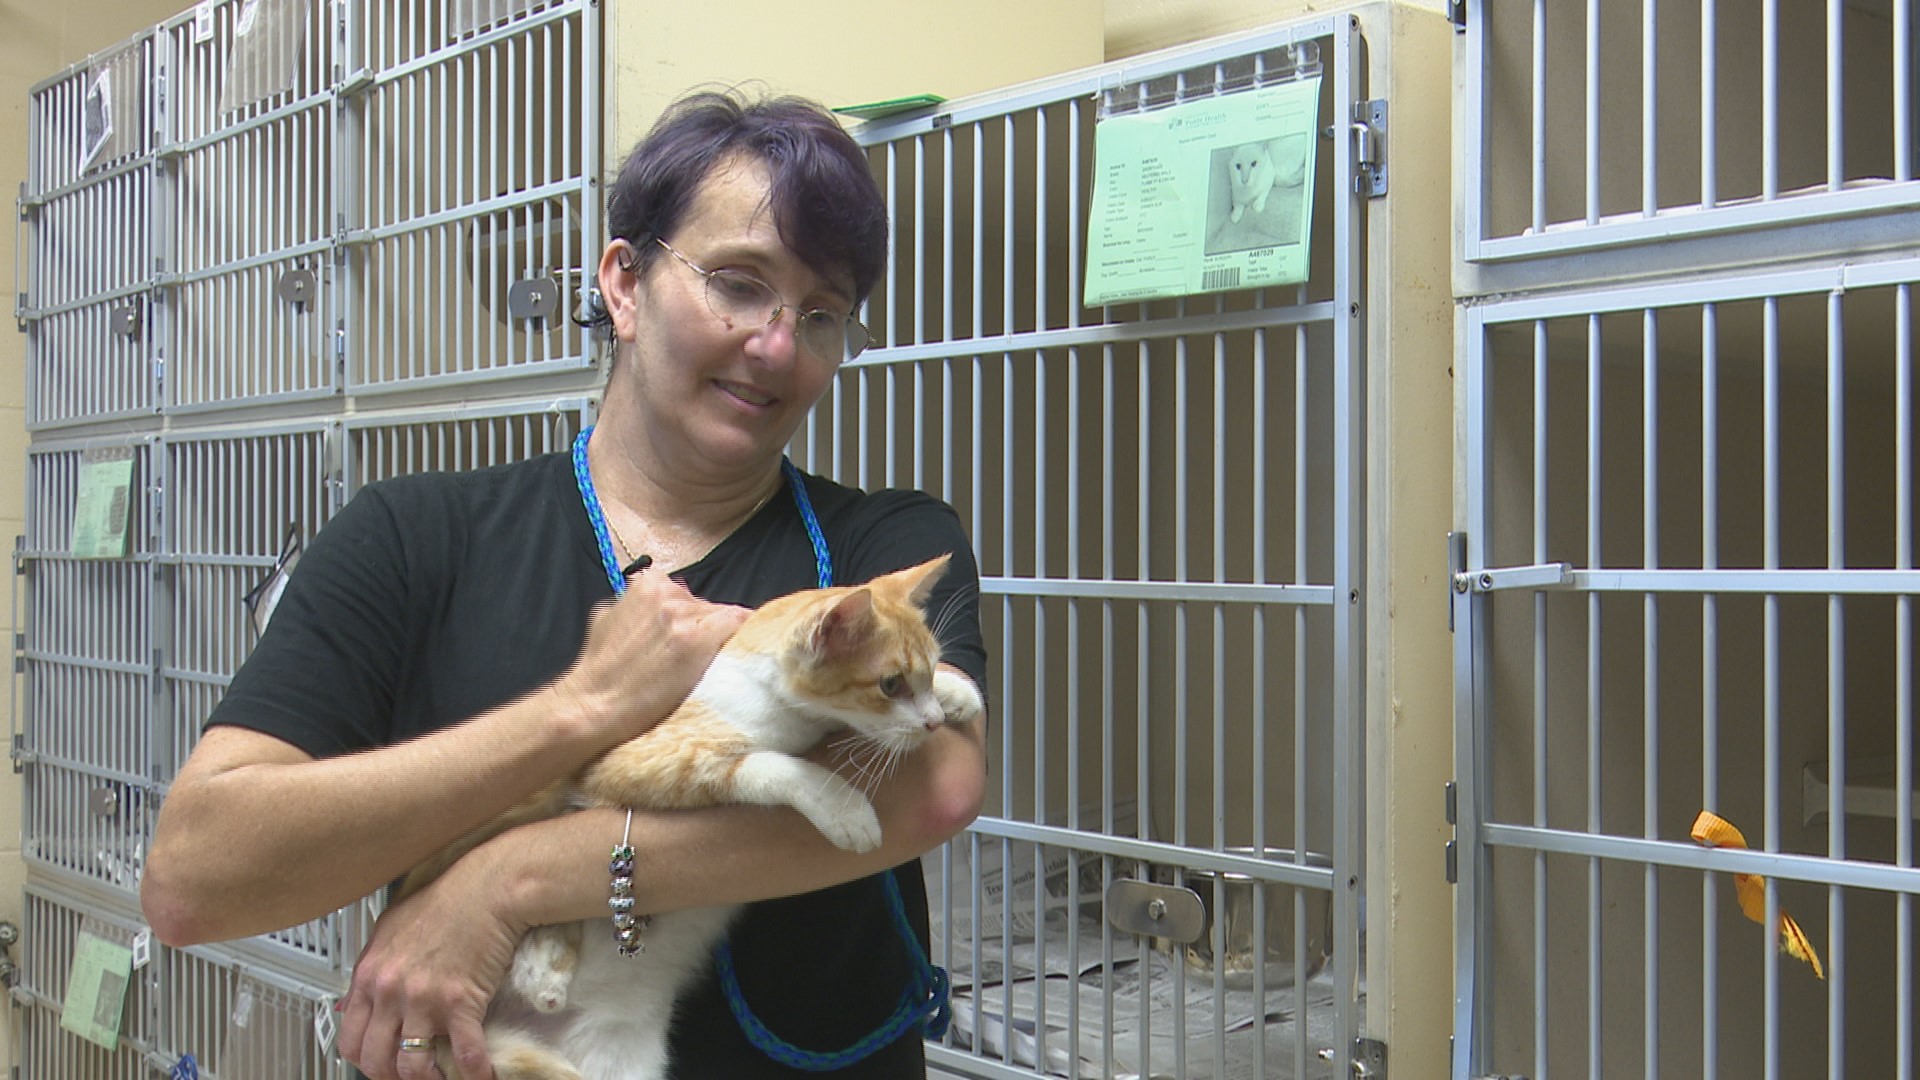 Local animal shelter volunteer shares fostering experience